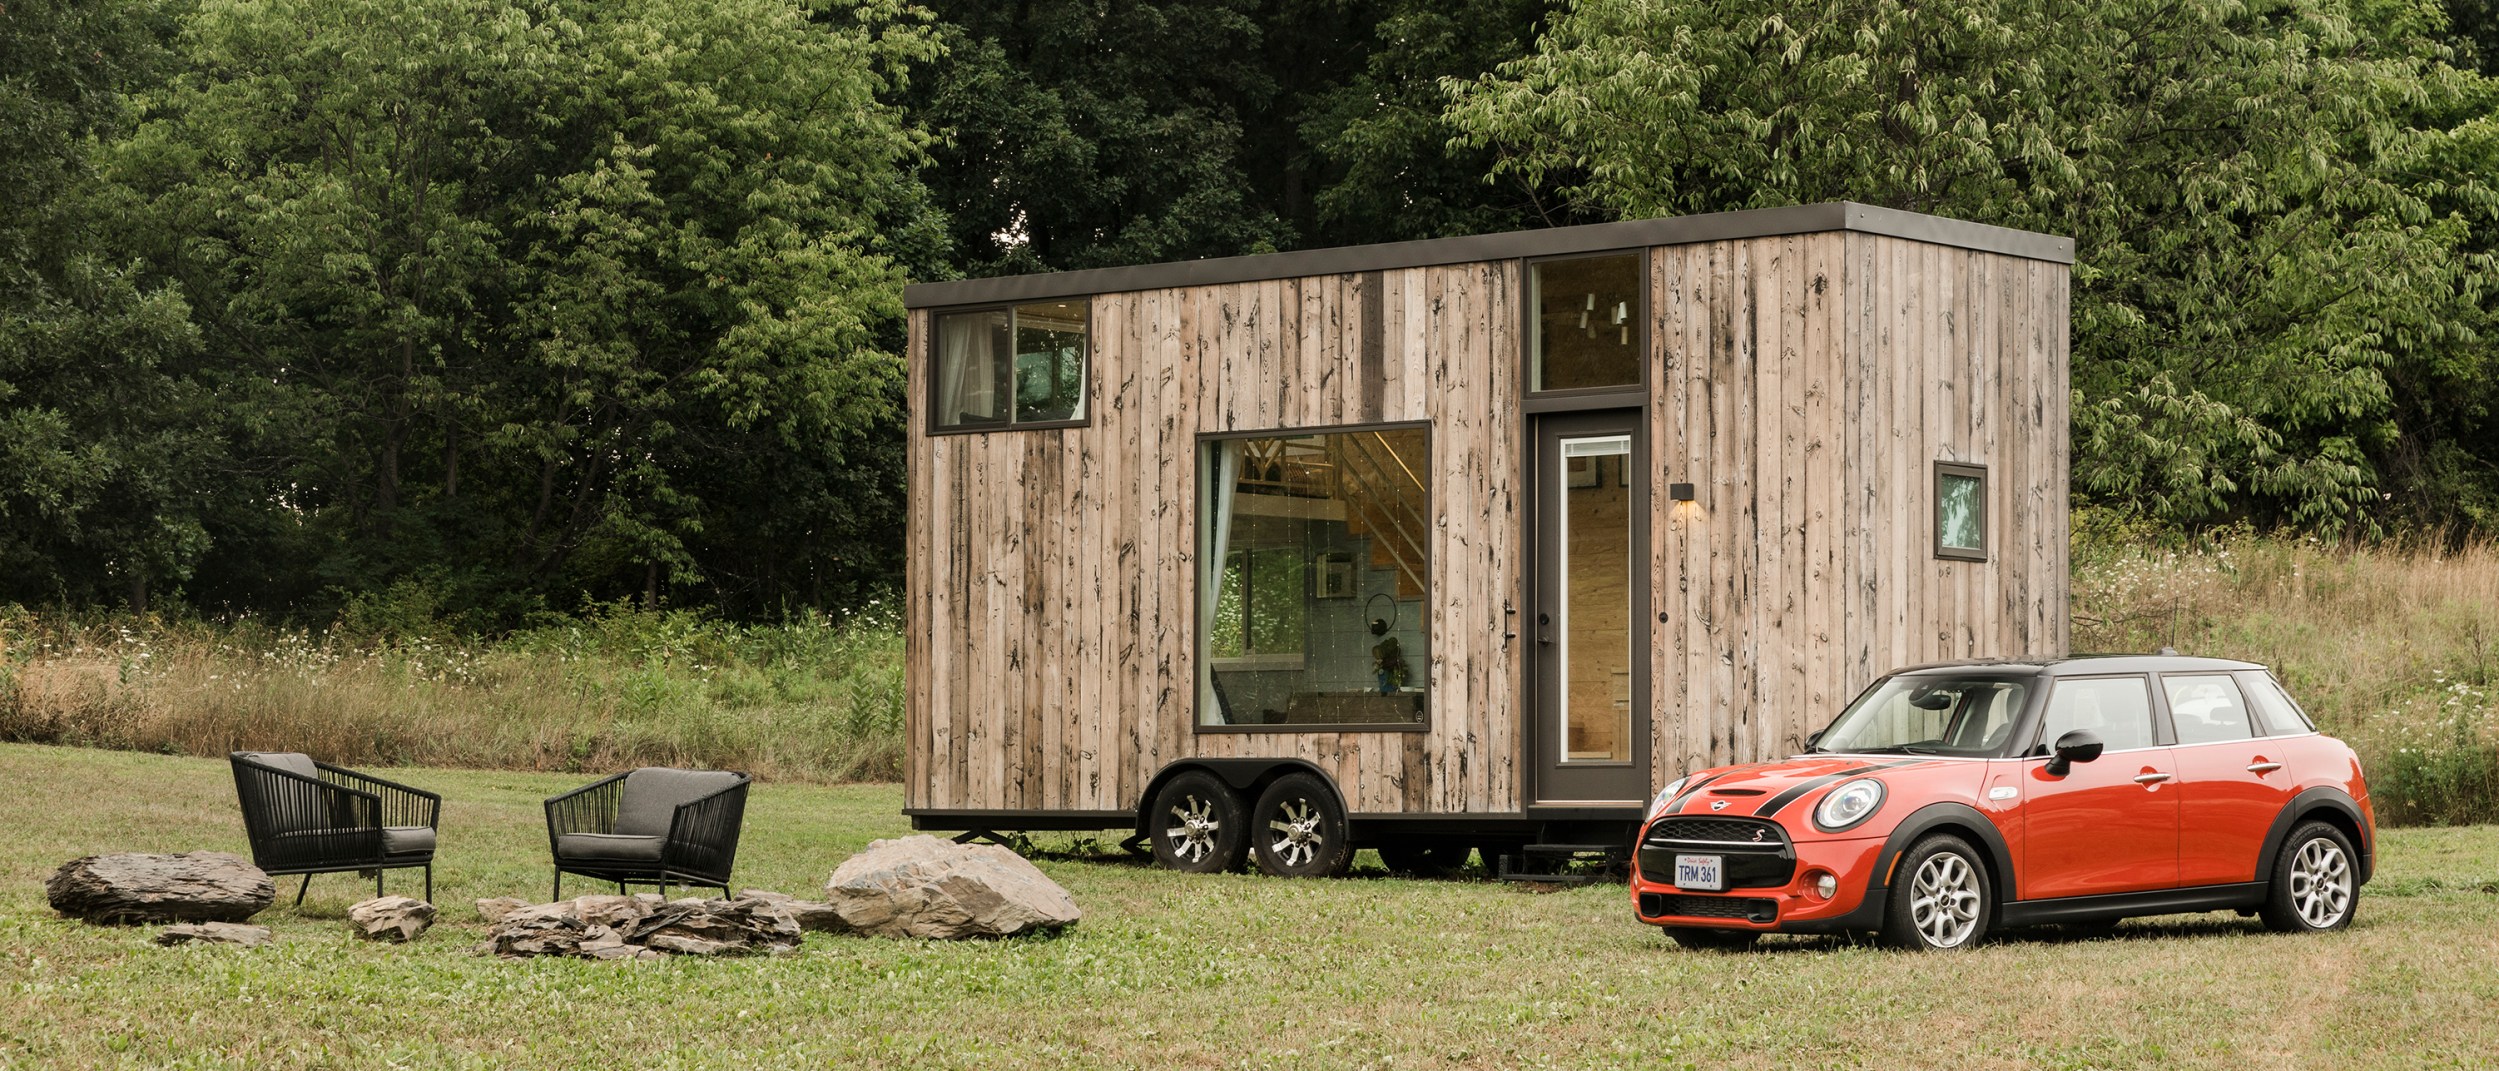 A red MINI Cooper is parked outside of an Airbnb tiny home listing with an outdoor seating area in Marlboro, New York.